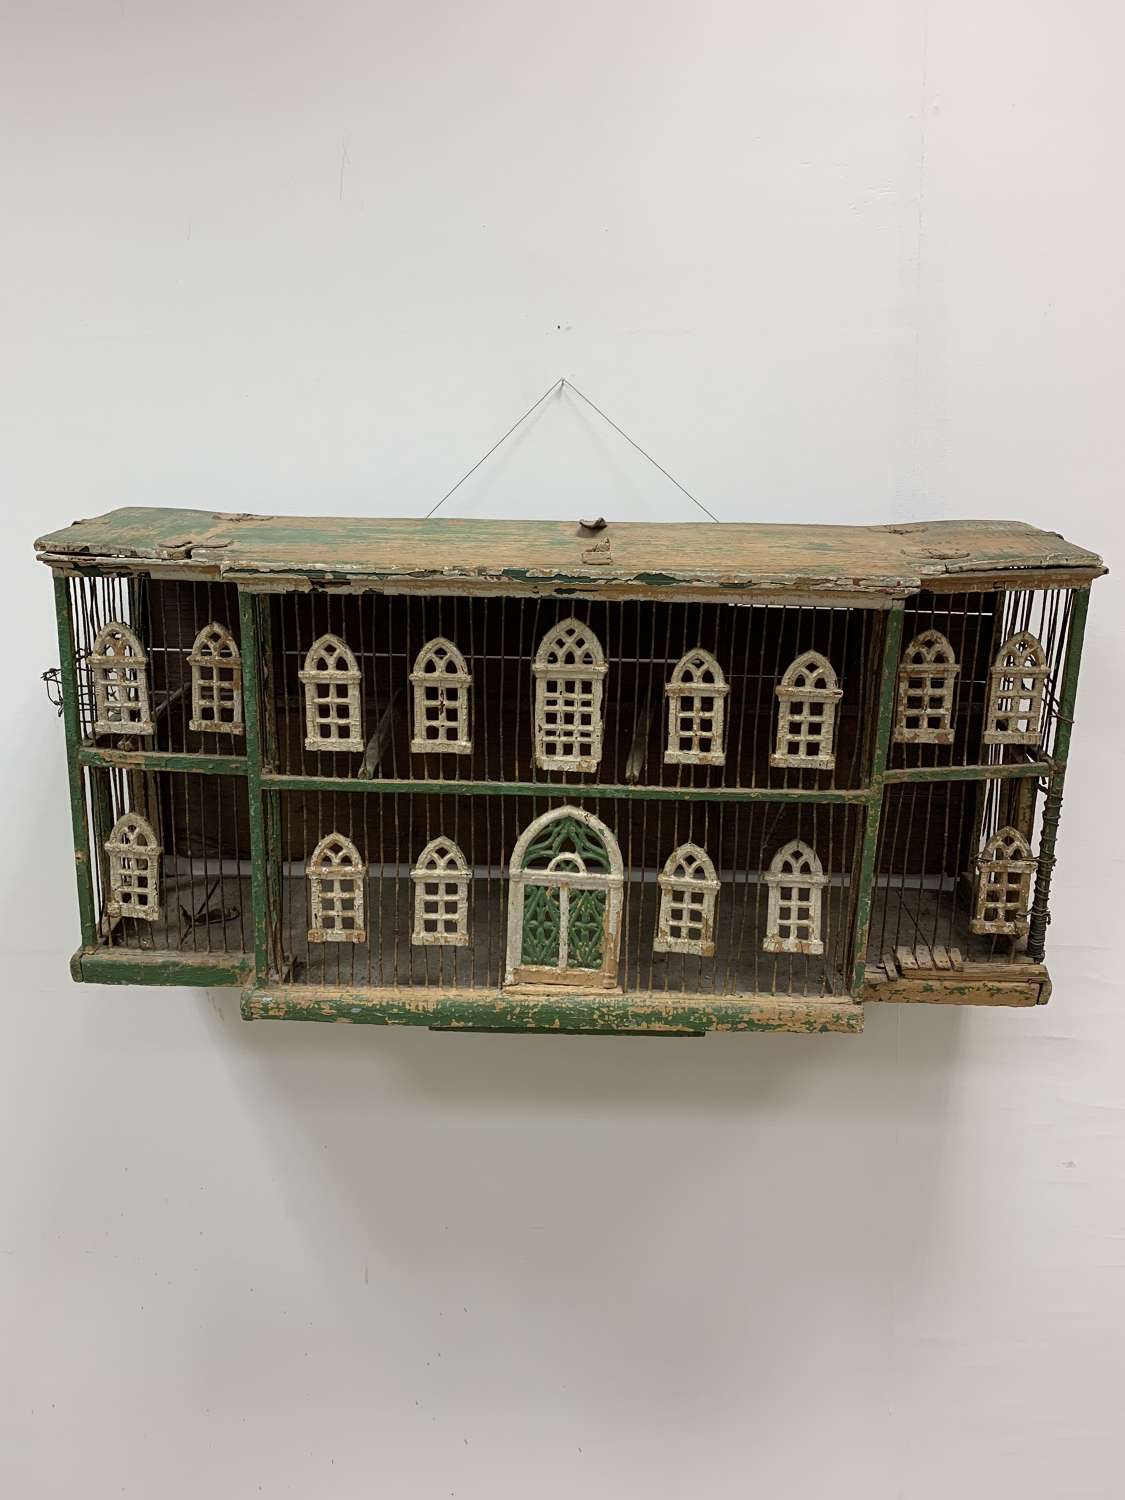 Late 19th century Architectural bird cage